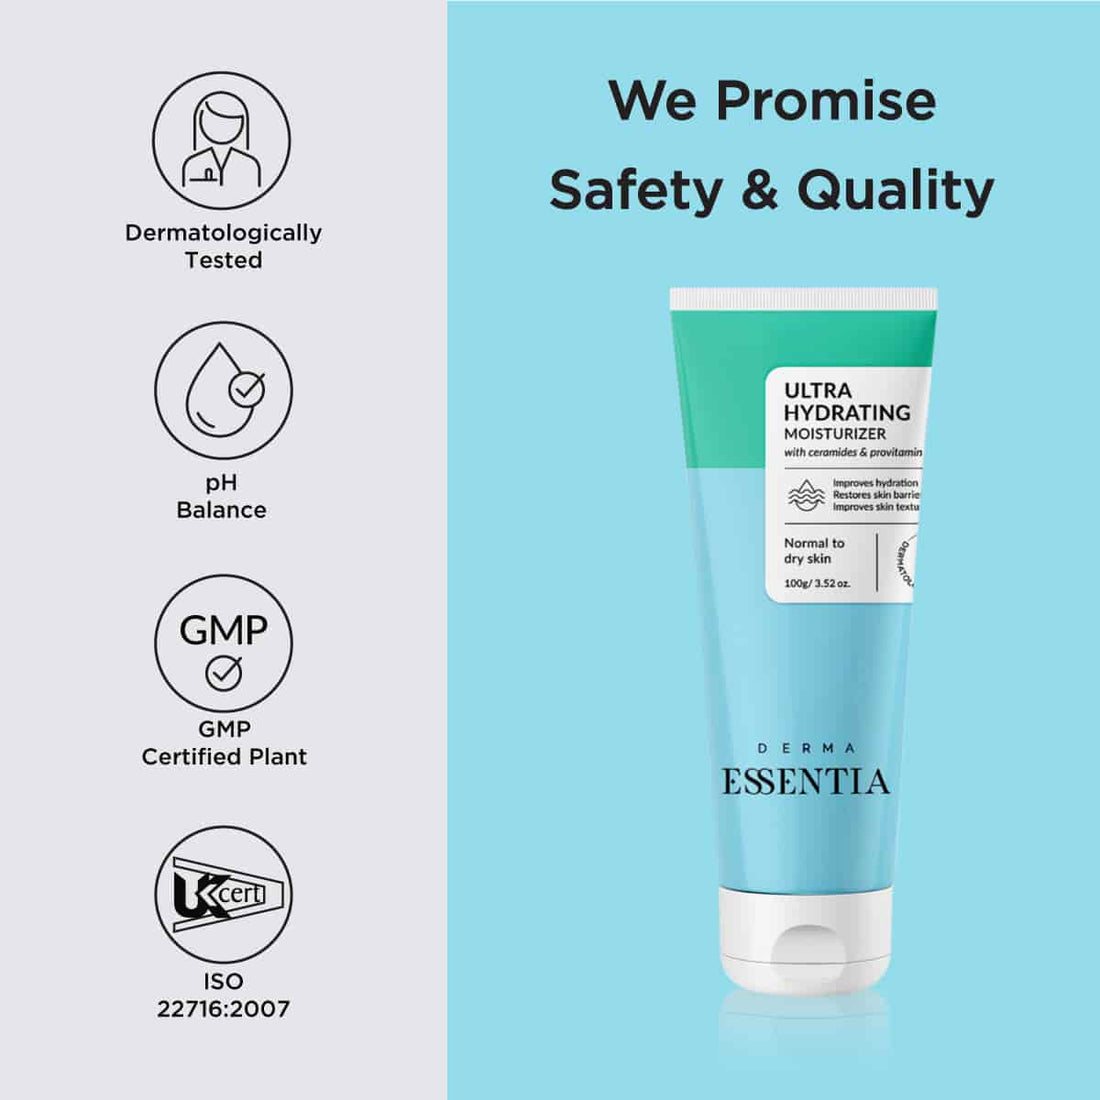 Ultra Hydrating Moisturizer Safety Features